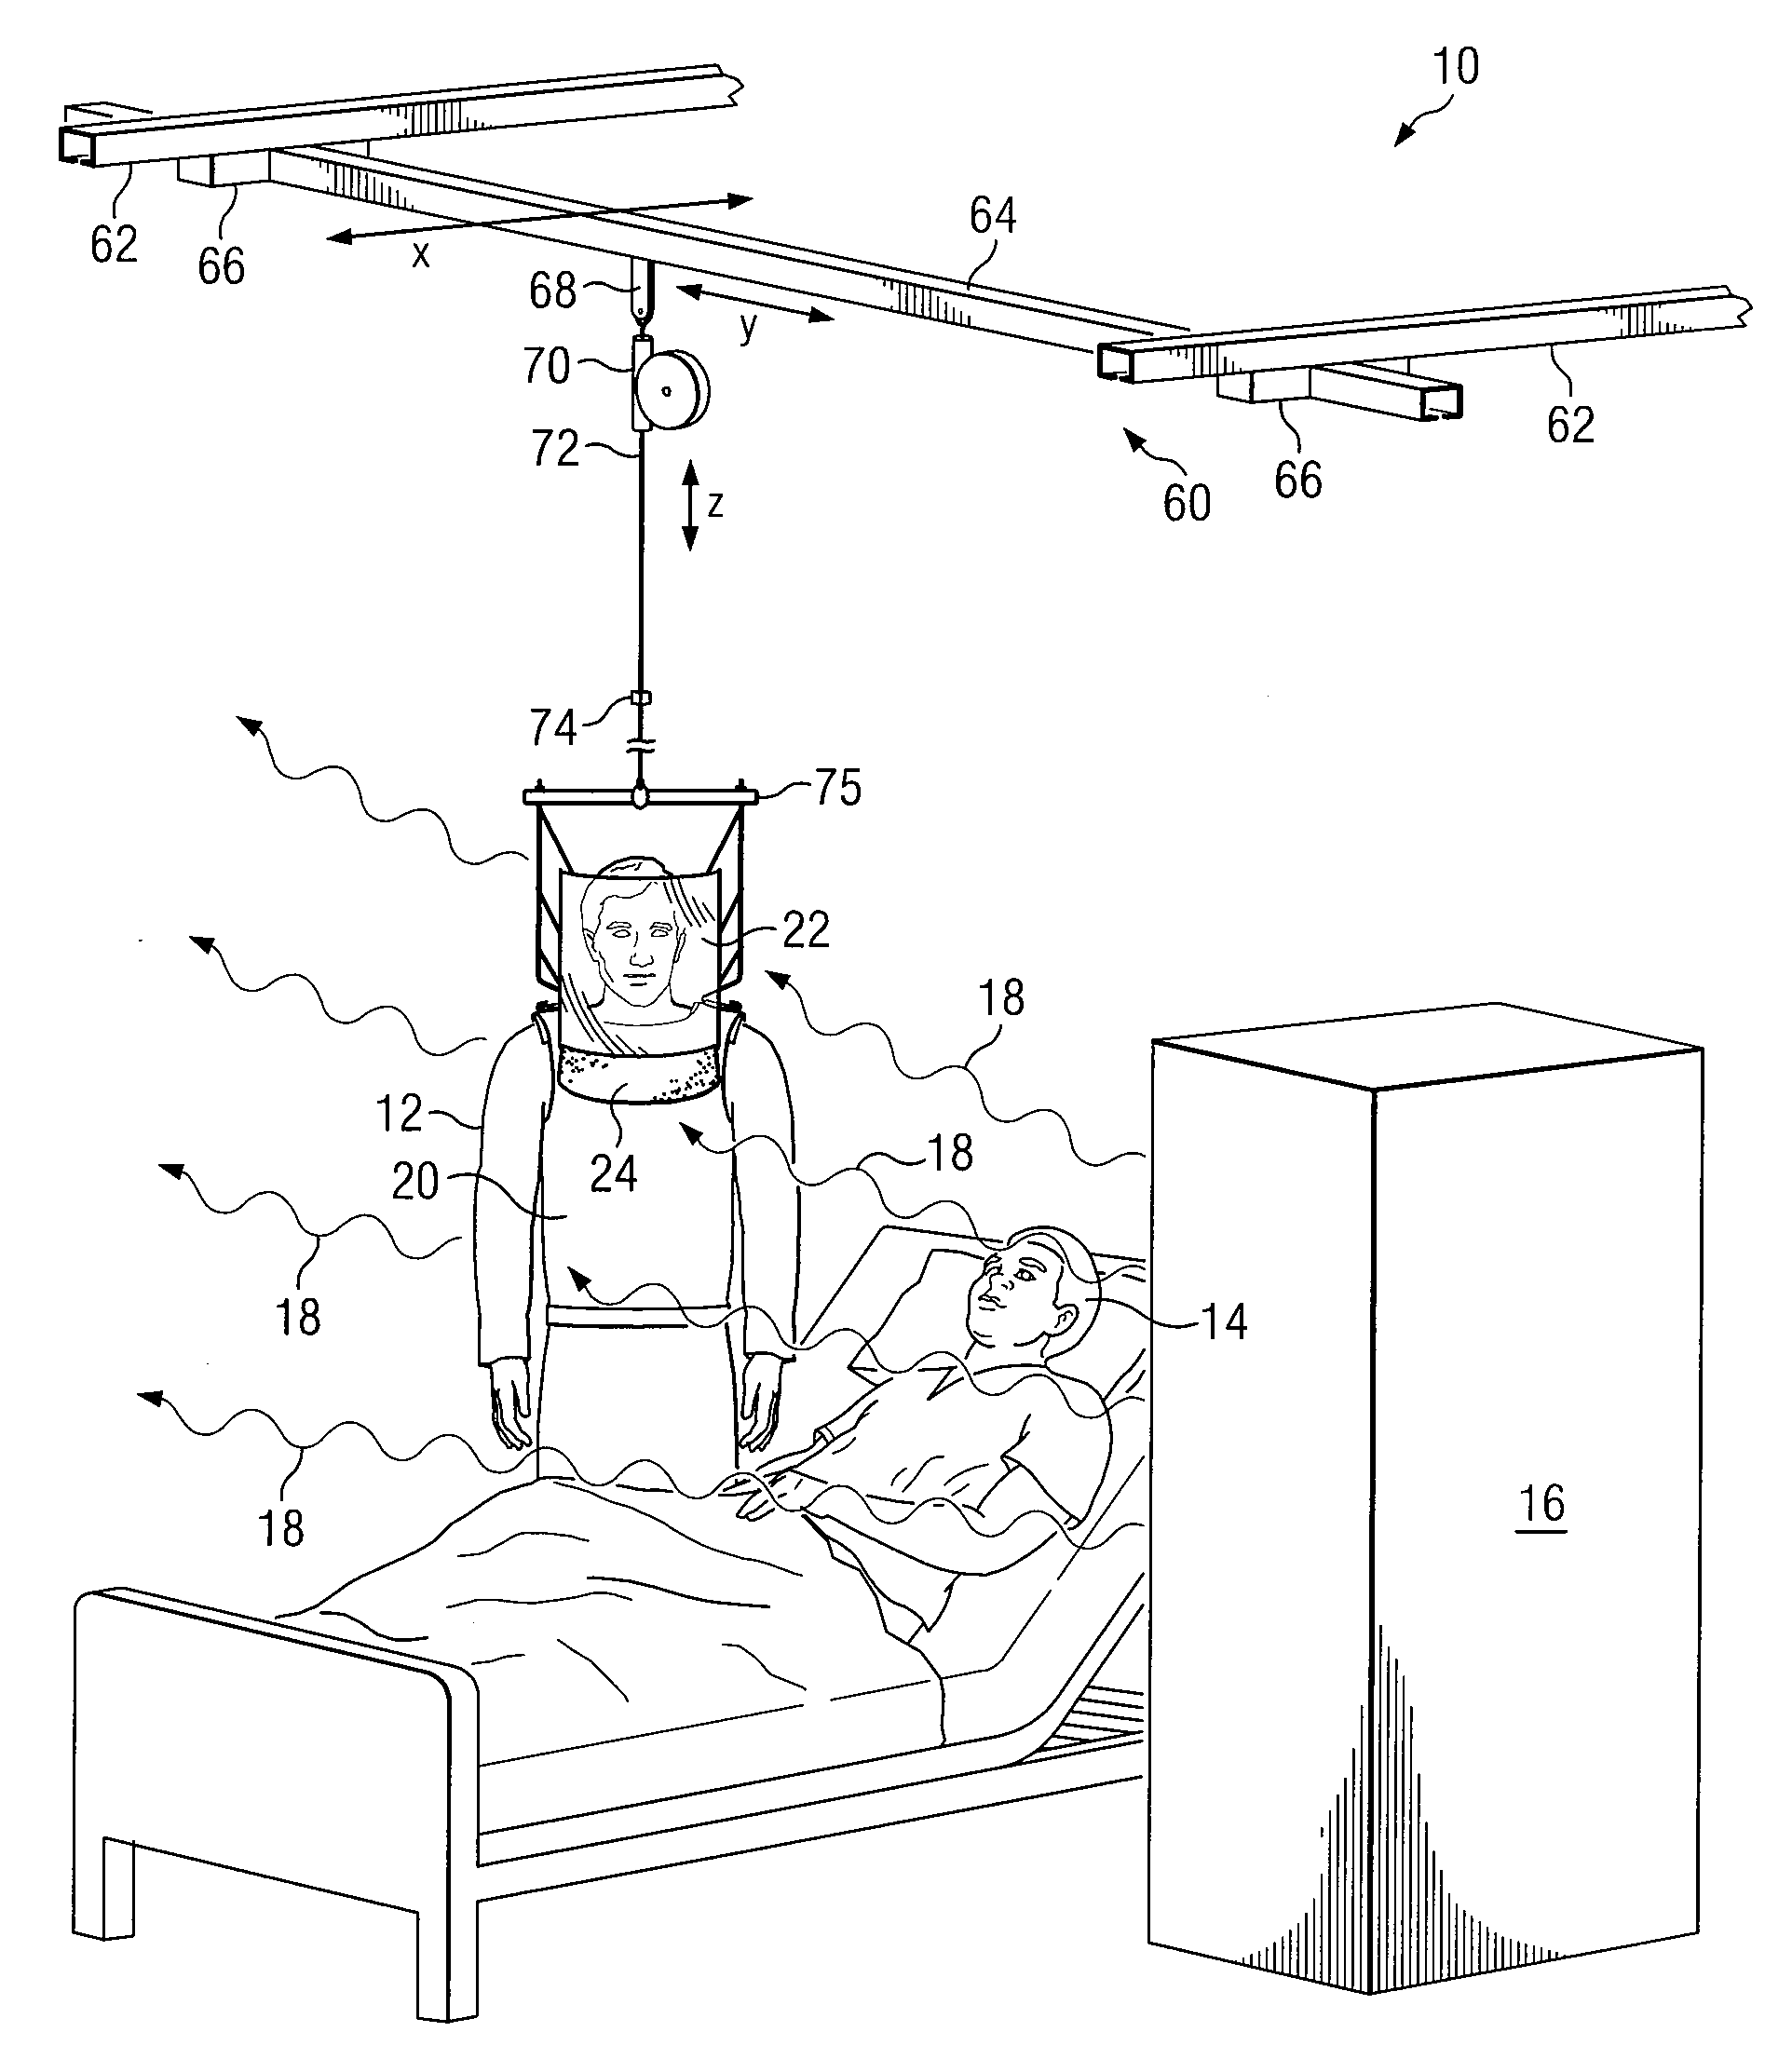 System and Method for Implementing a Suspended Personal Radiation Protection System